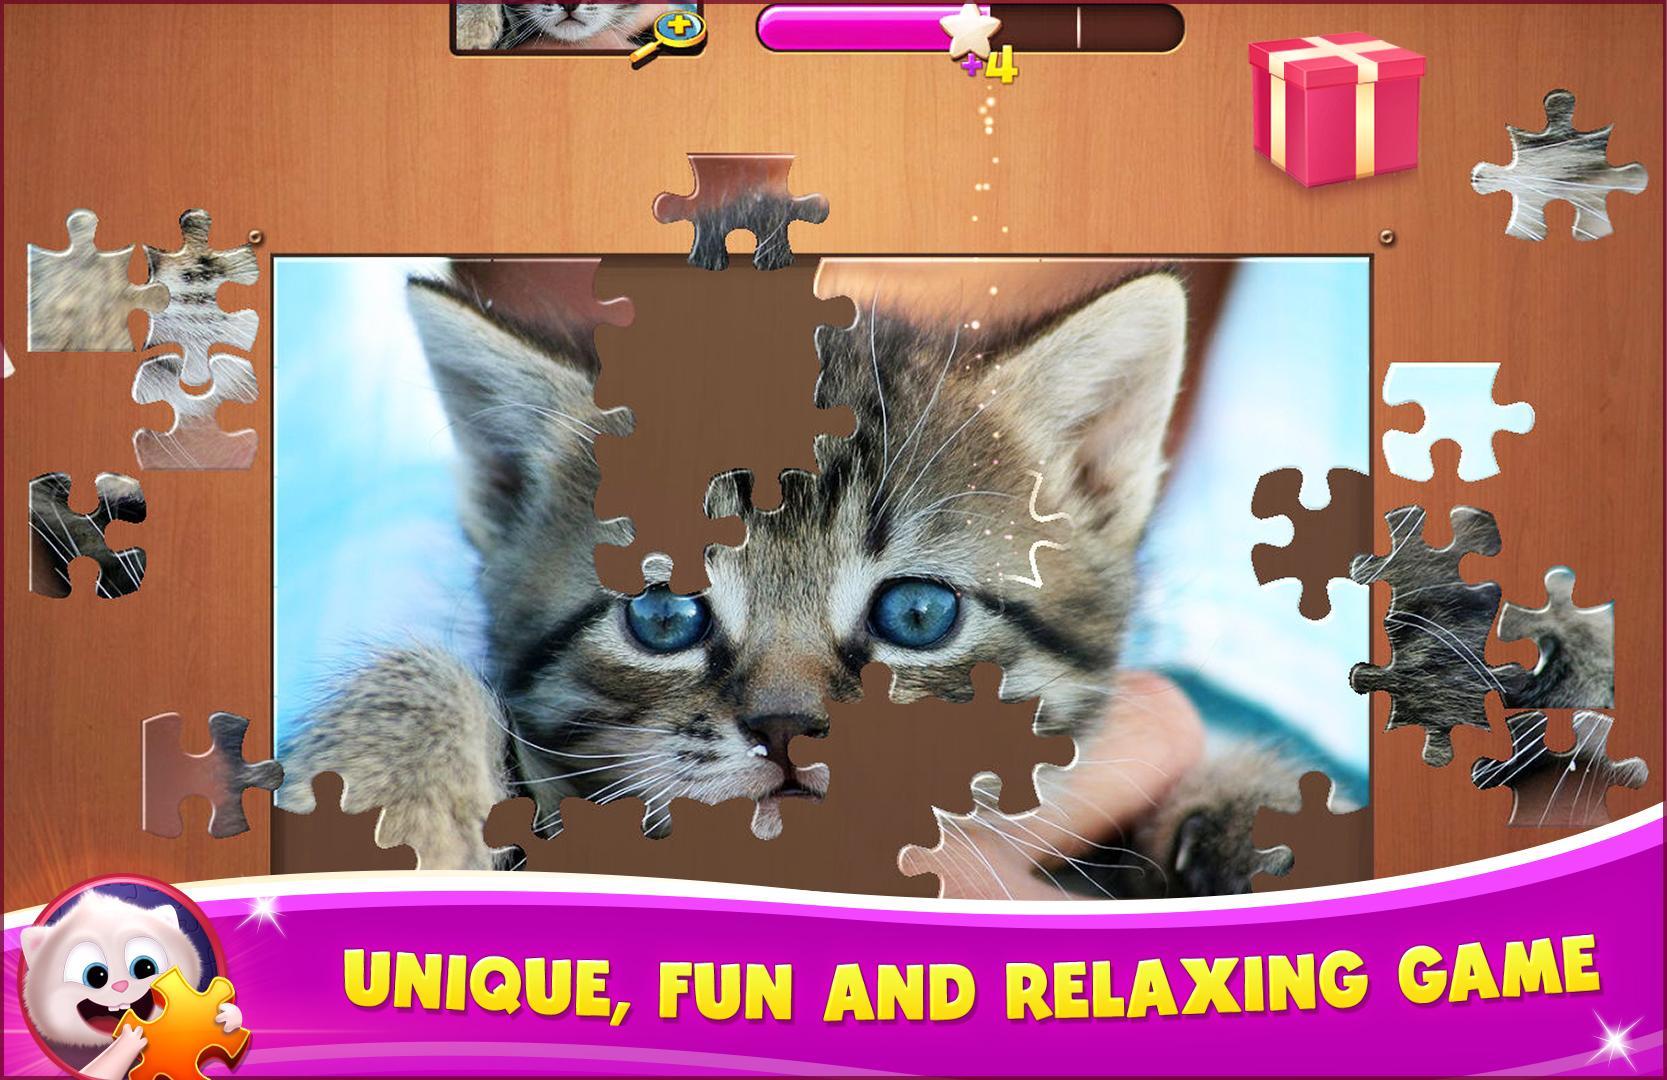 Screenshot 1 of Jigsaw Puzzle Quest – Daily Picture Puzzles 1.0.8